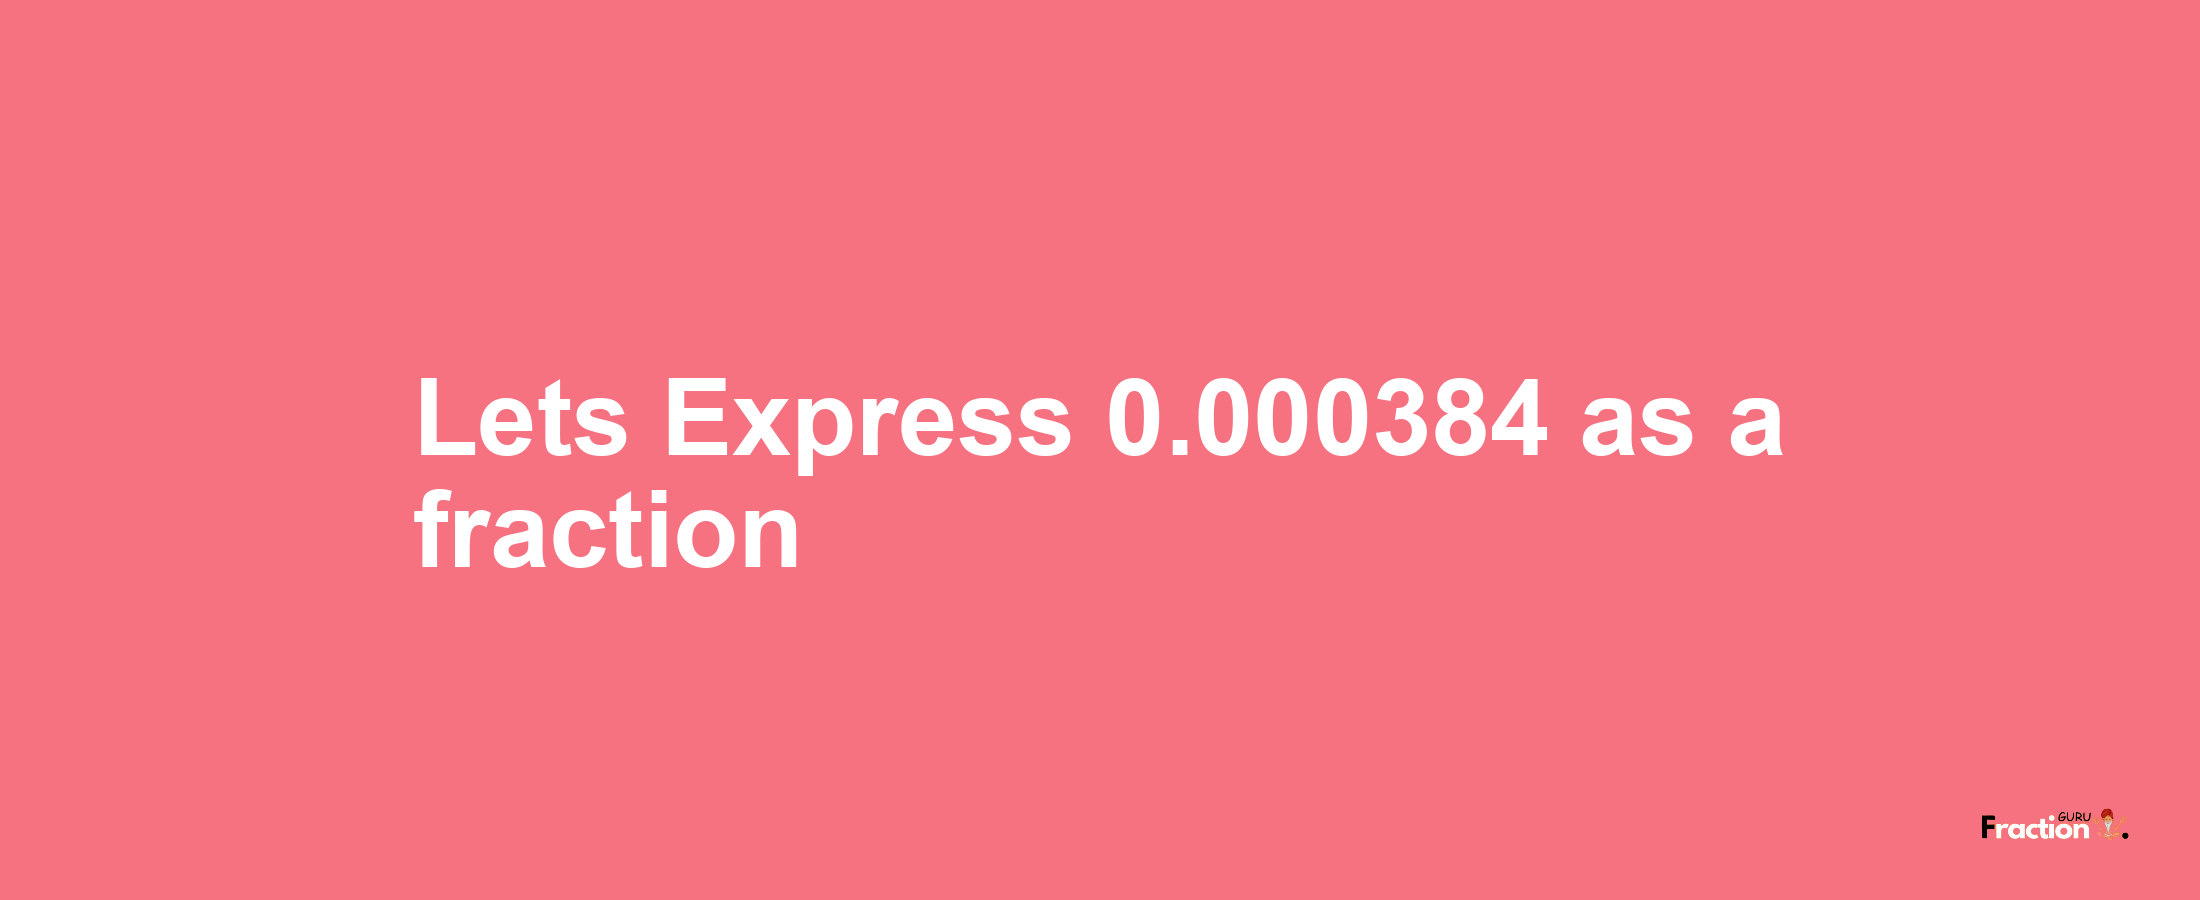 Lets Express 0.000384 as afraction